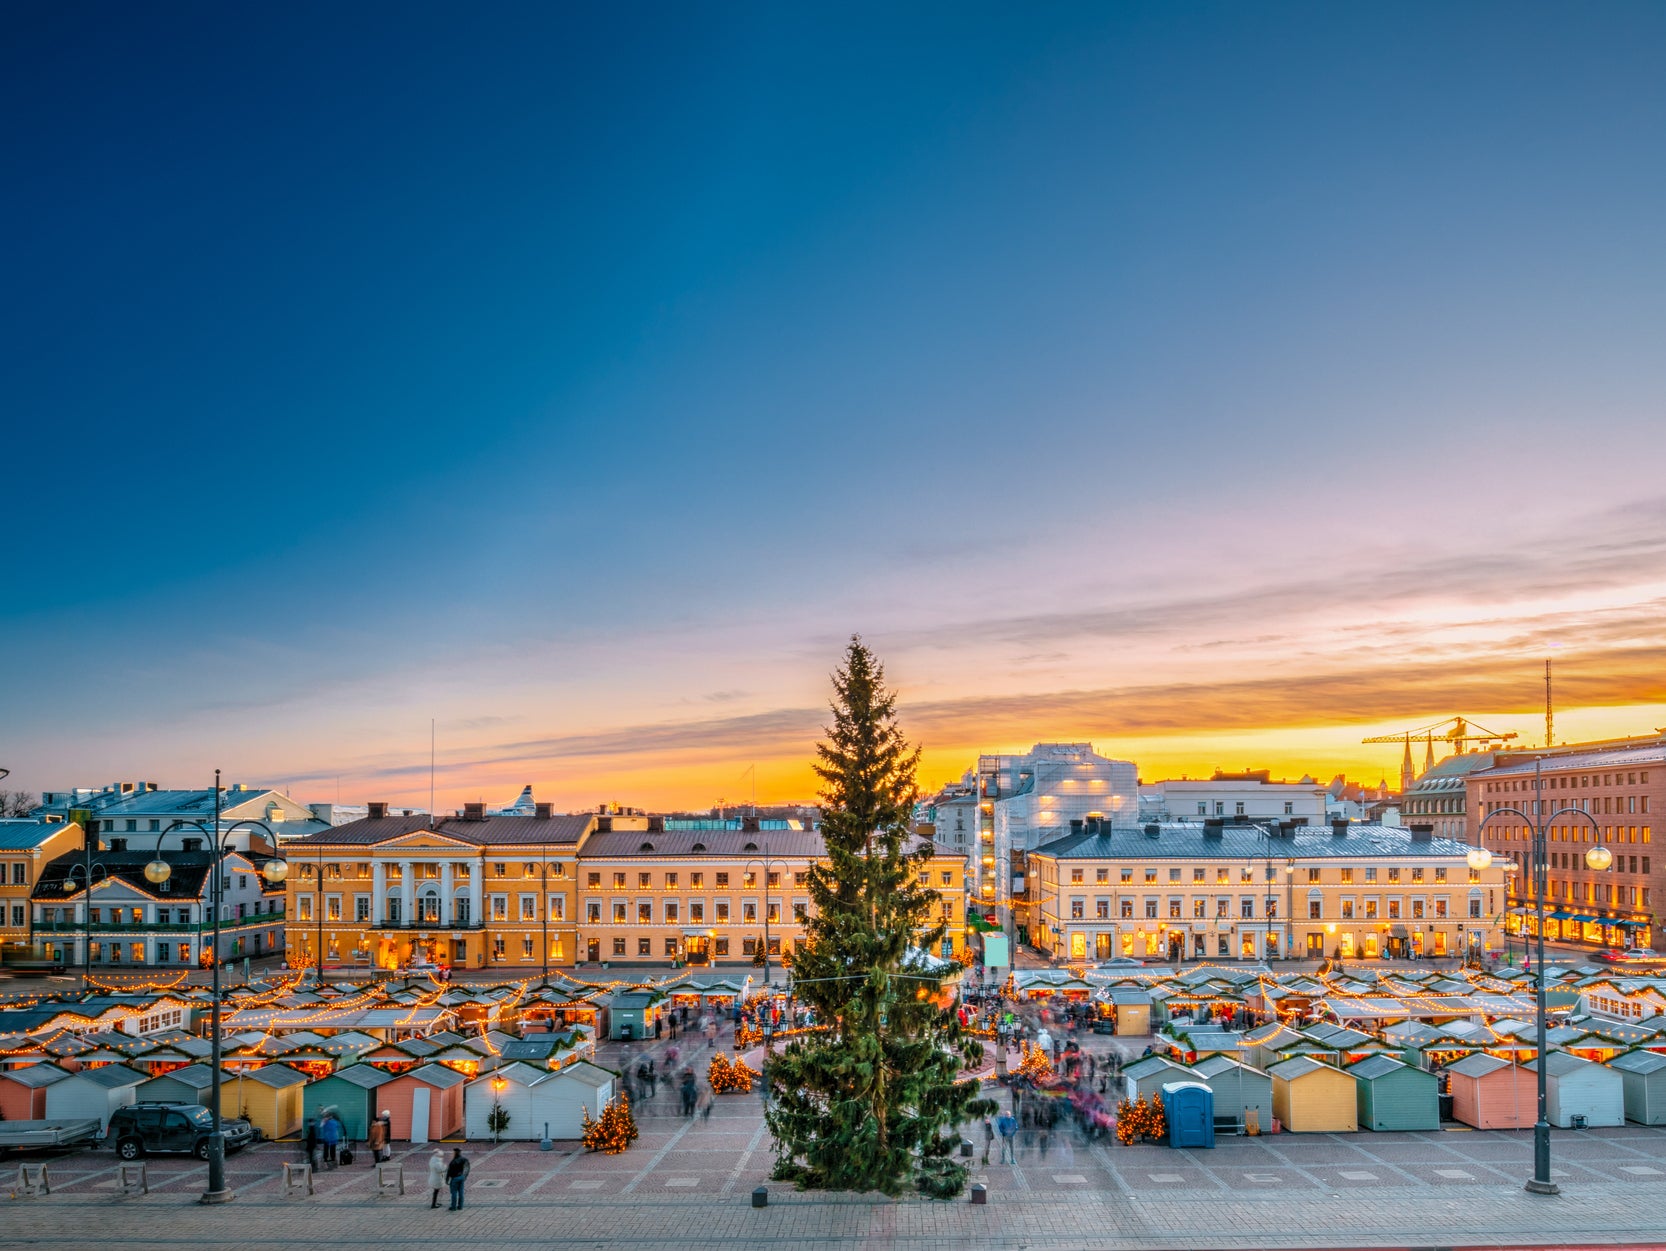 Cruise the Baltic Sea with stops in Stockholm, Copenhagen and Helsinki